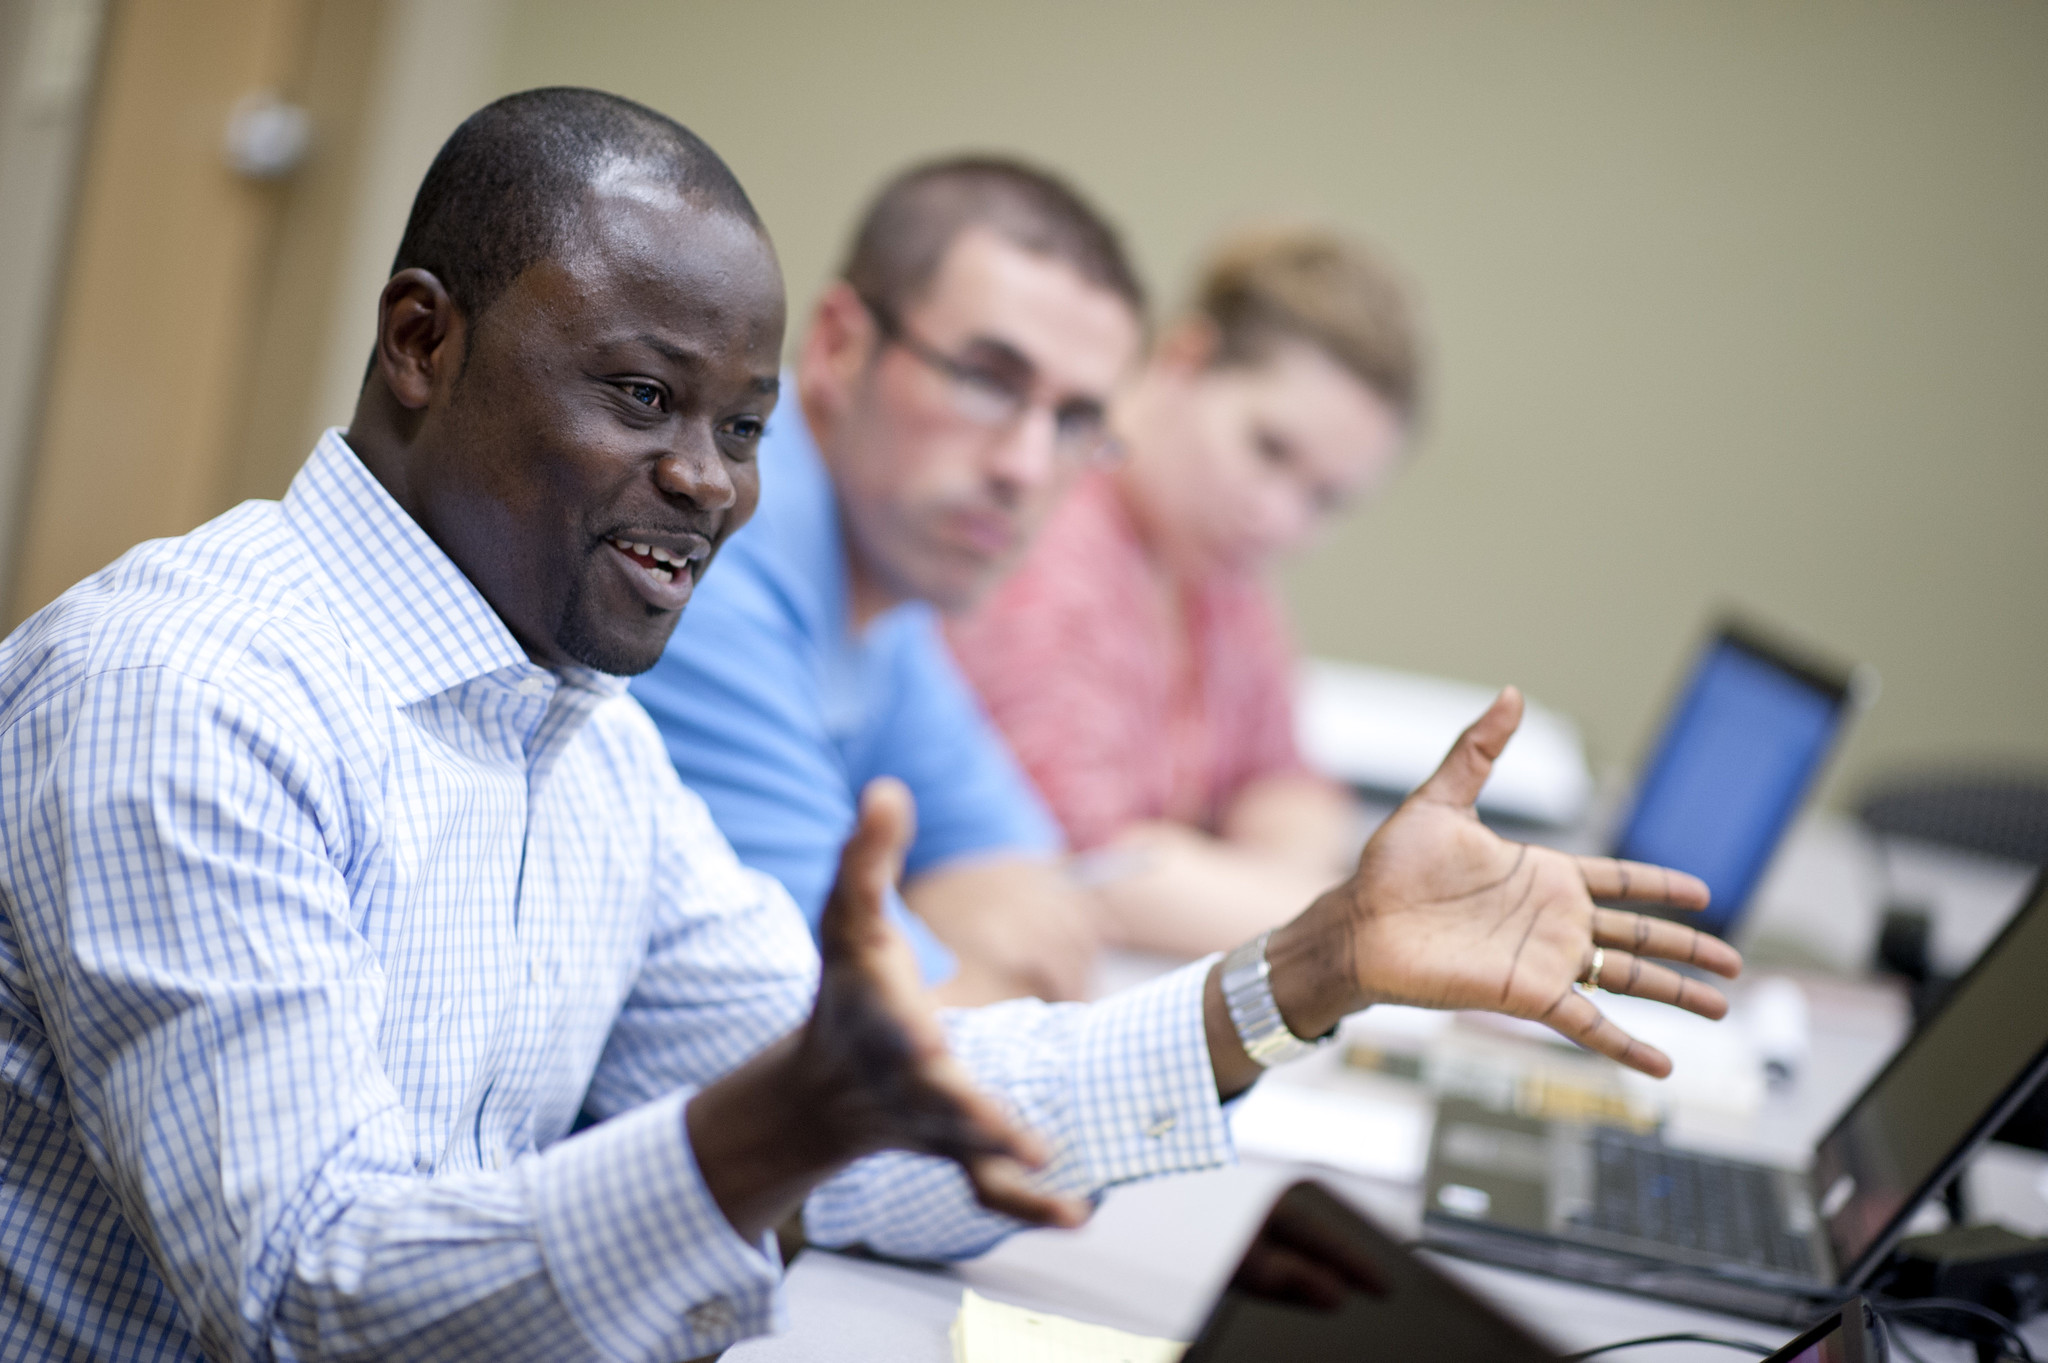 Improve your organization's cultural intelligence in Bethel University's MBA and Strategic Leadership programs.